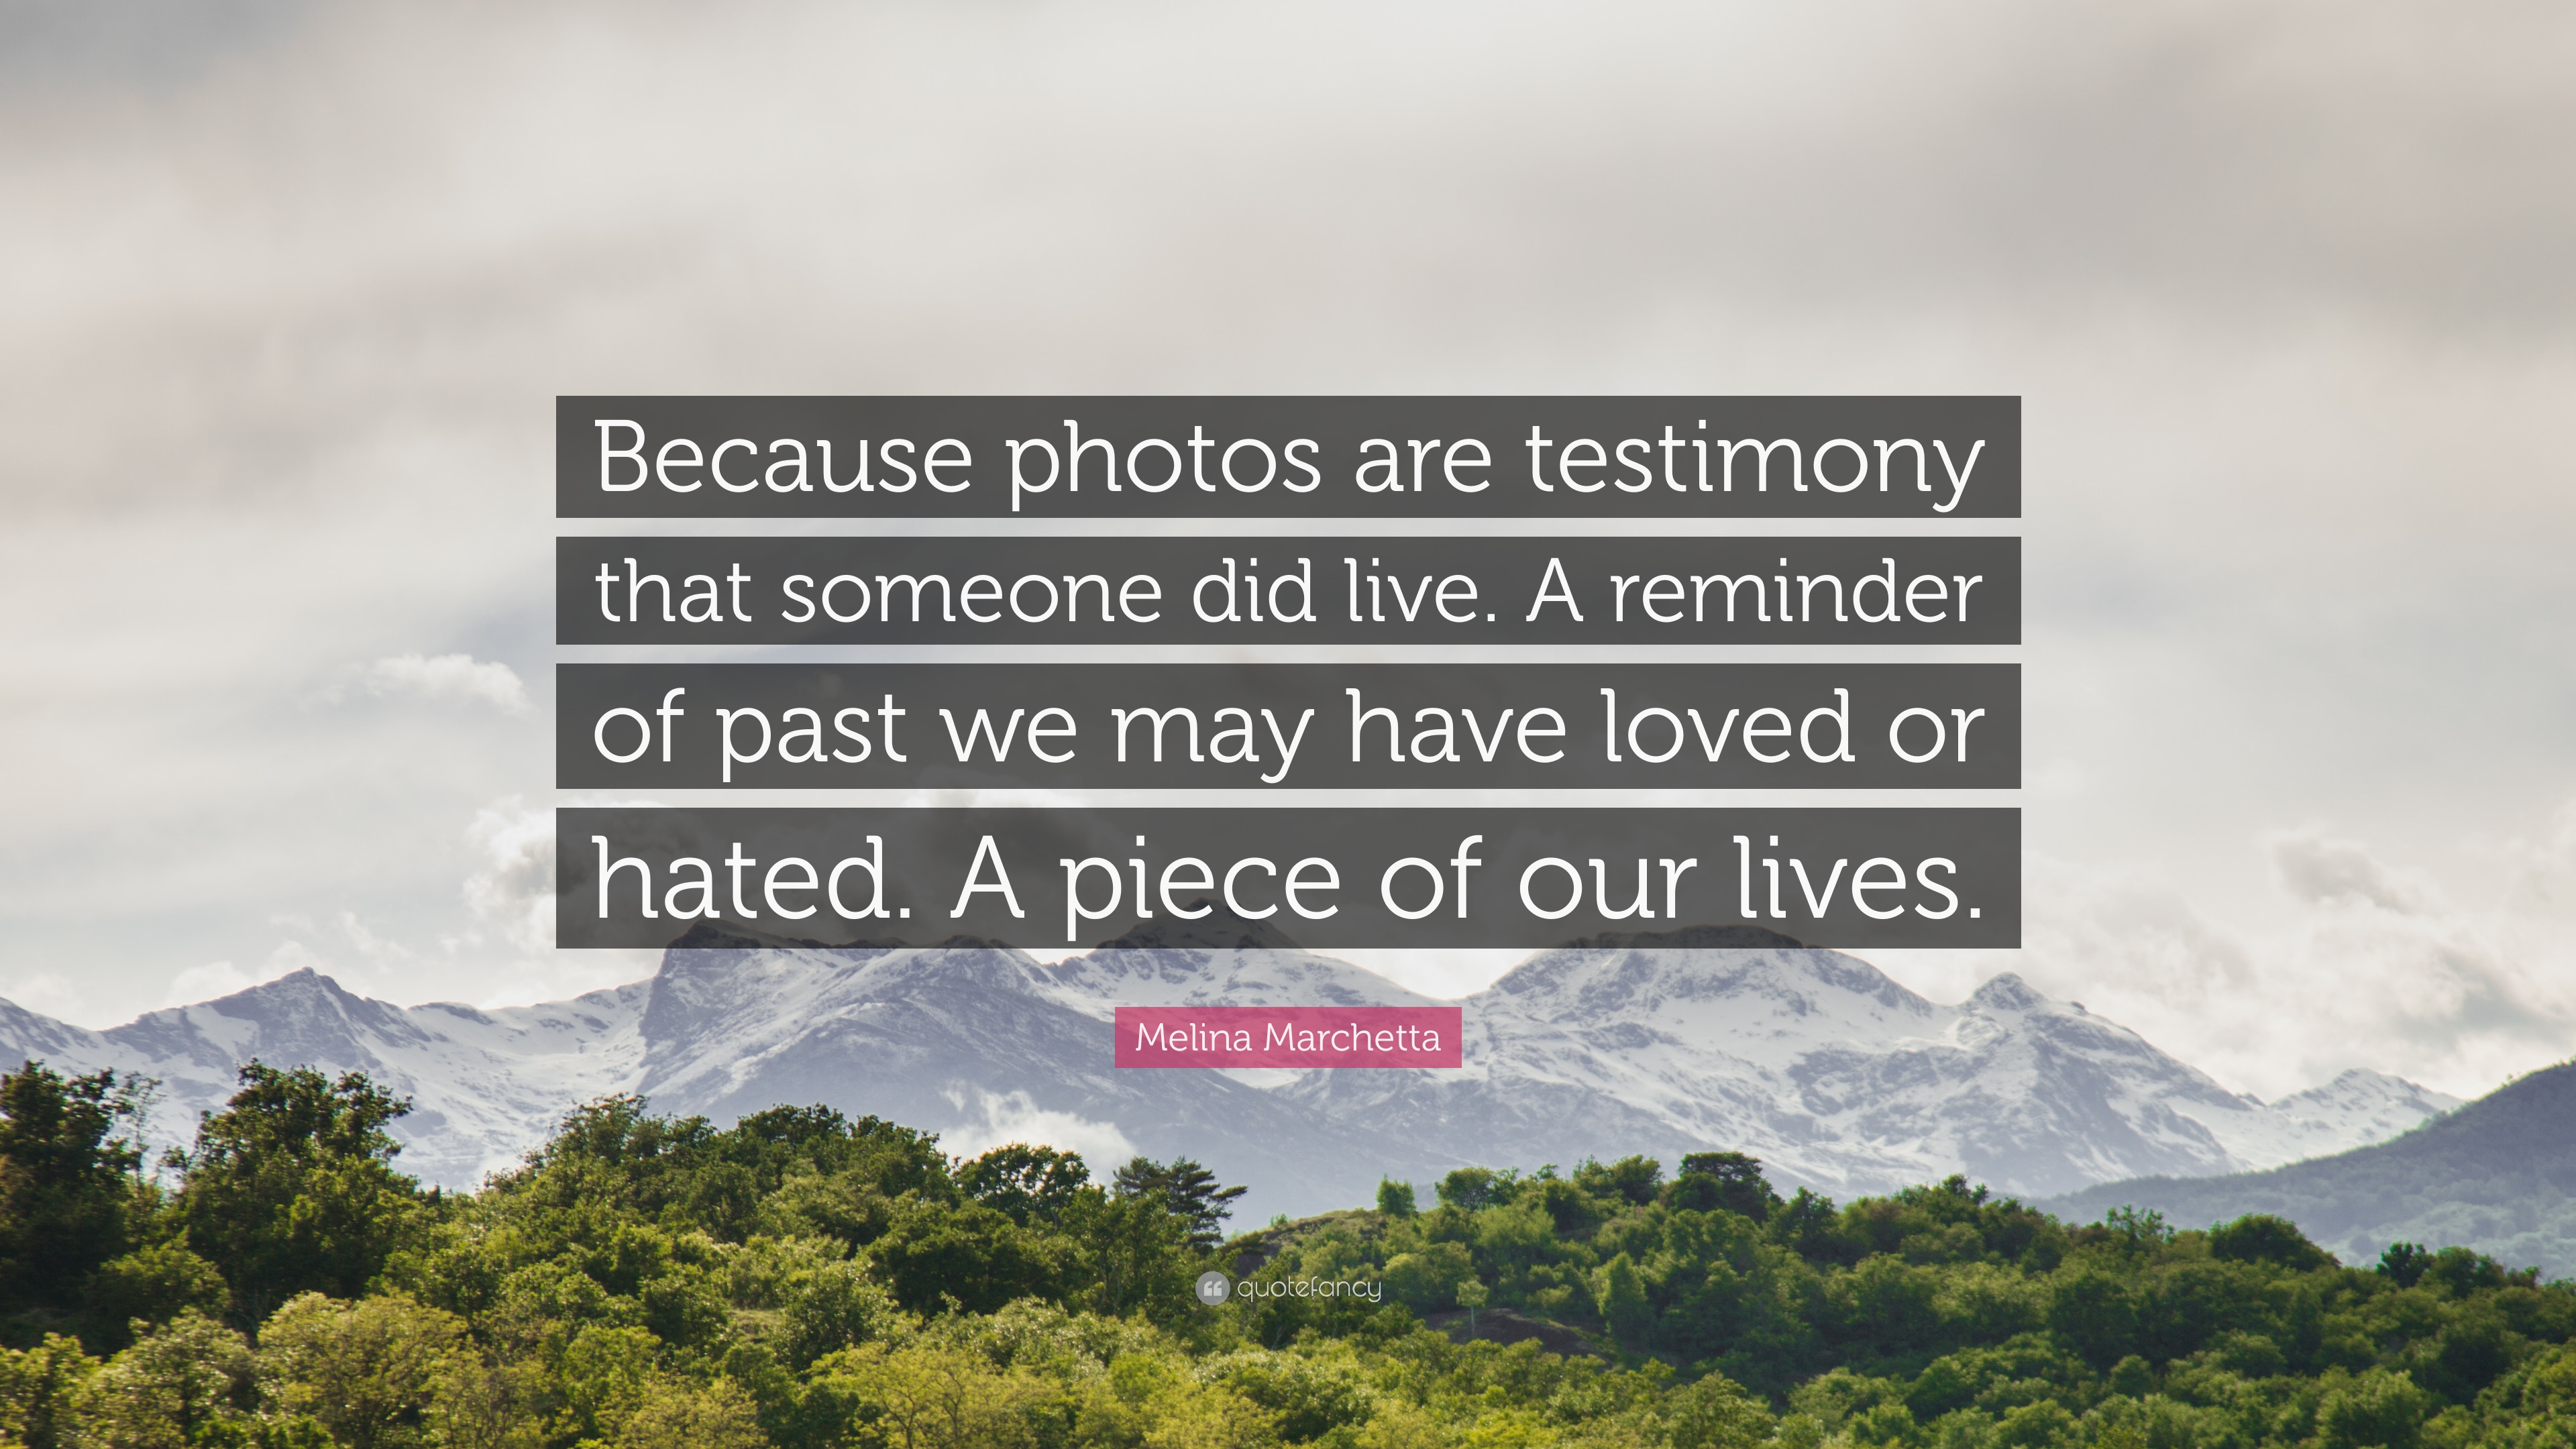 Melina marchetta quote âbecause photos are testimony that someone did live a reminder of past we